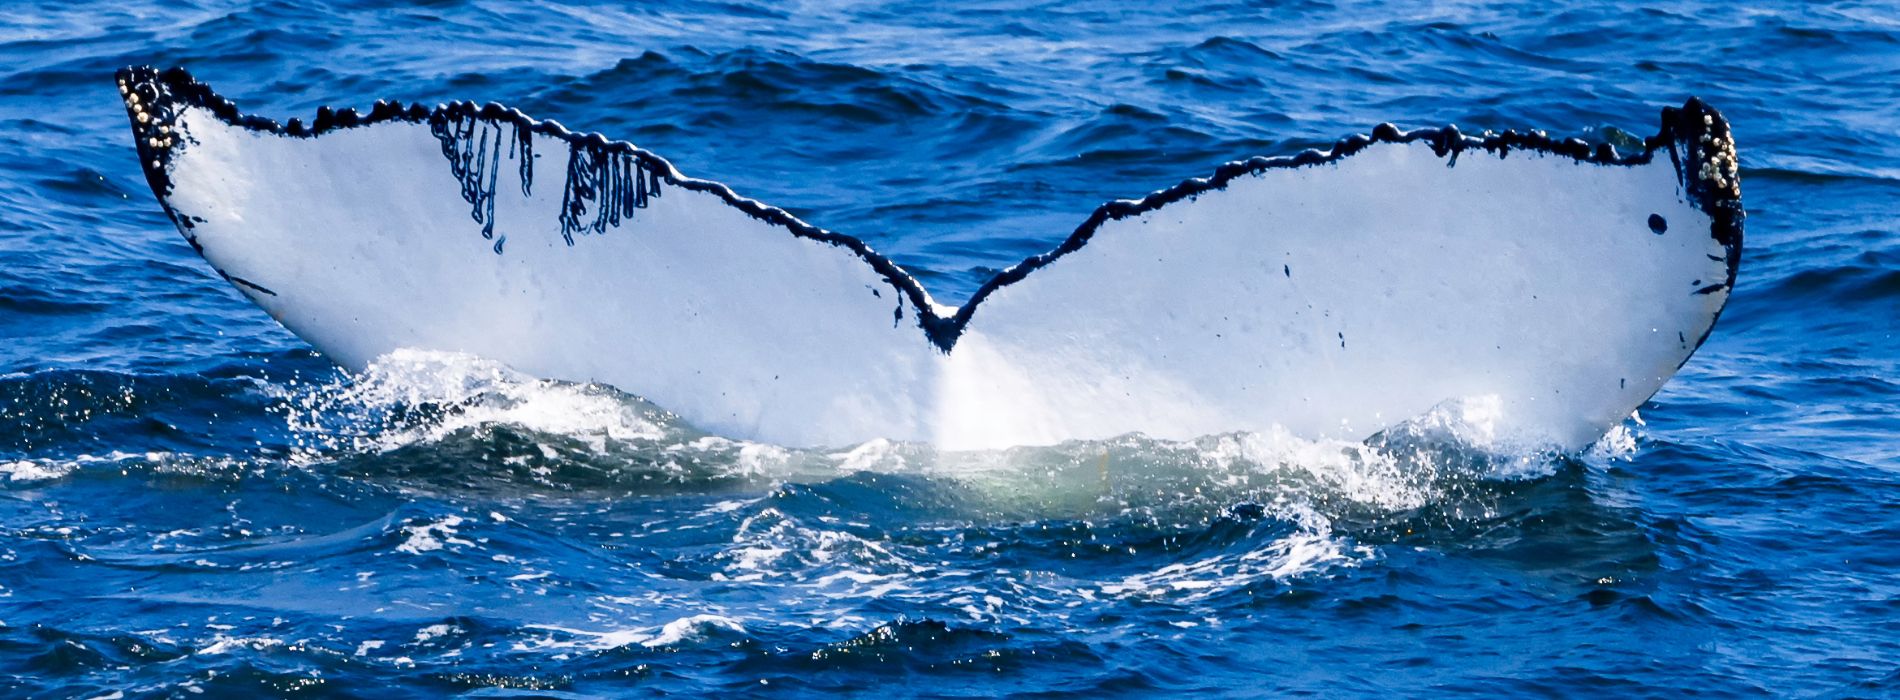 The Best Whale Watching Tours in Cape Cod